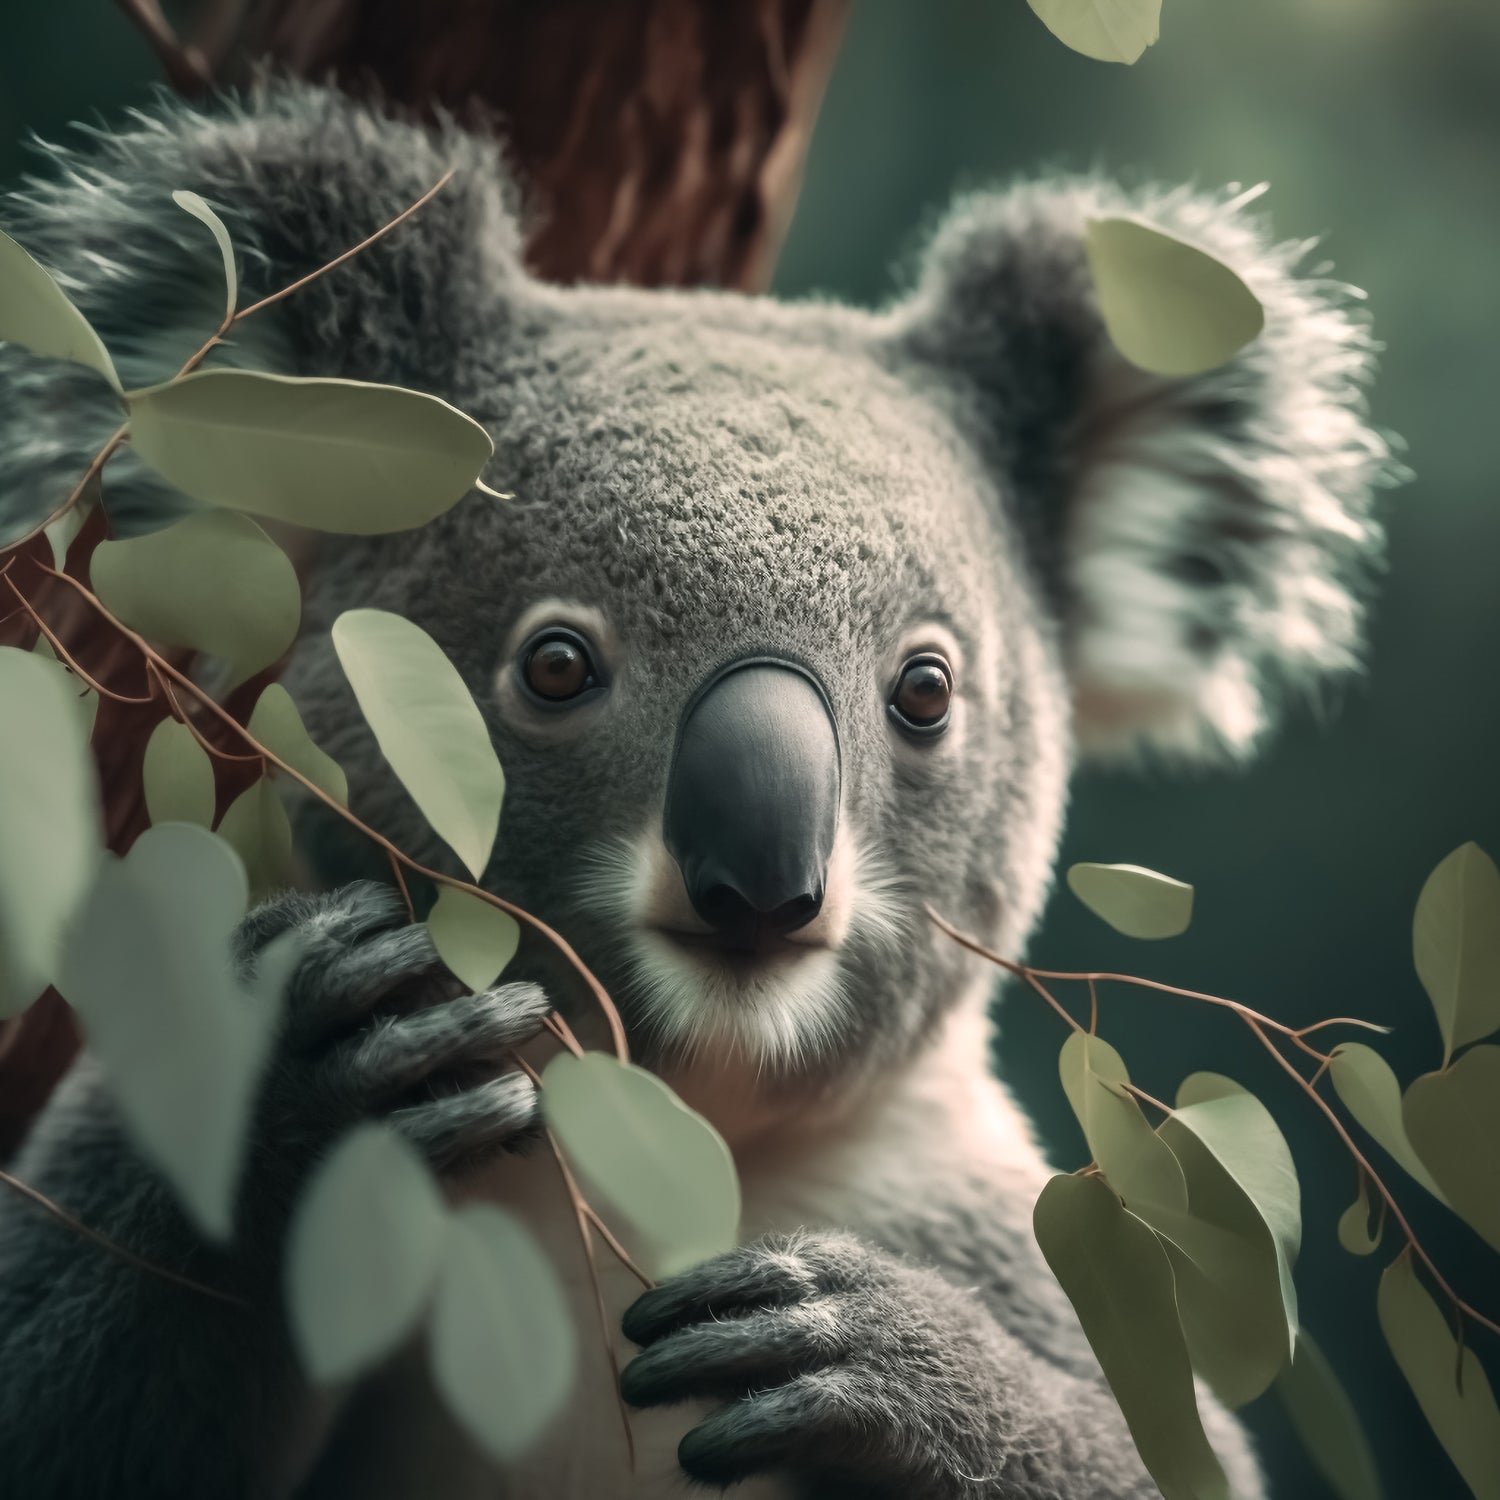 A photo of a koala with eucalyptus leaves. These leaves are one of the core fragrances in the fresh-smelling "eucalyptus Mint" candle from Tuscany Candle